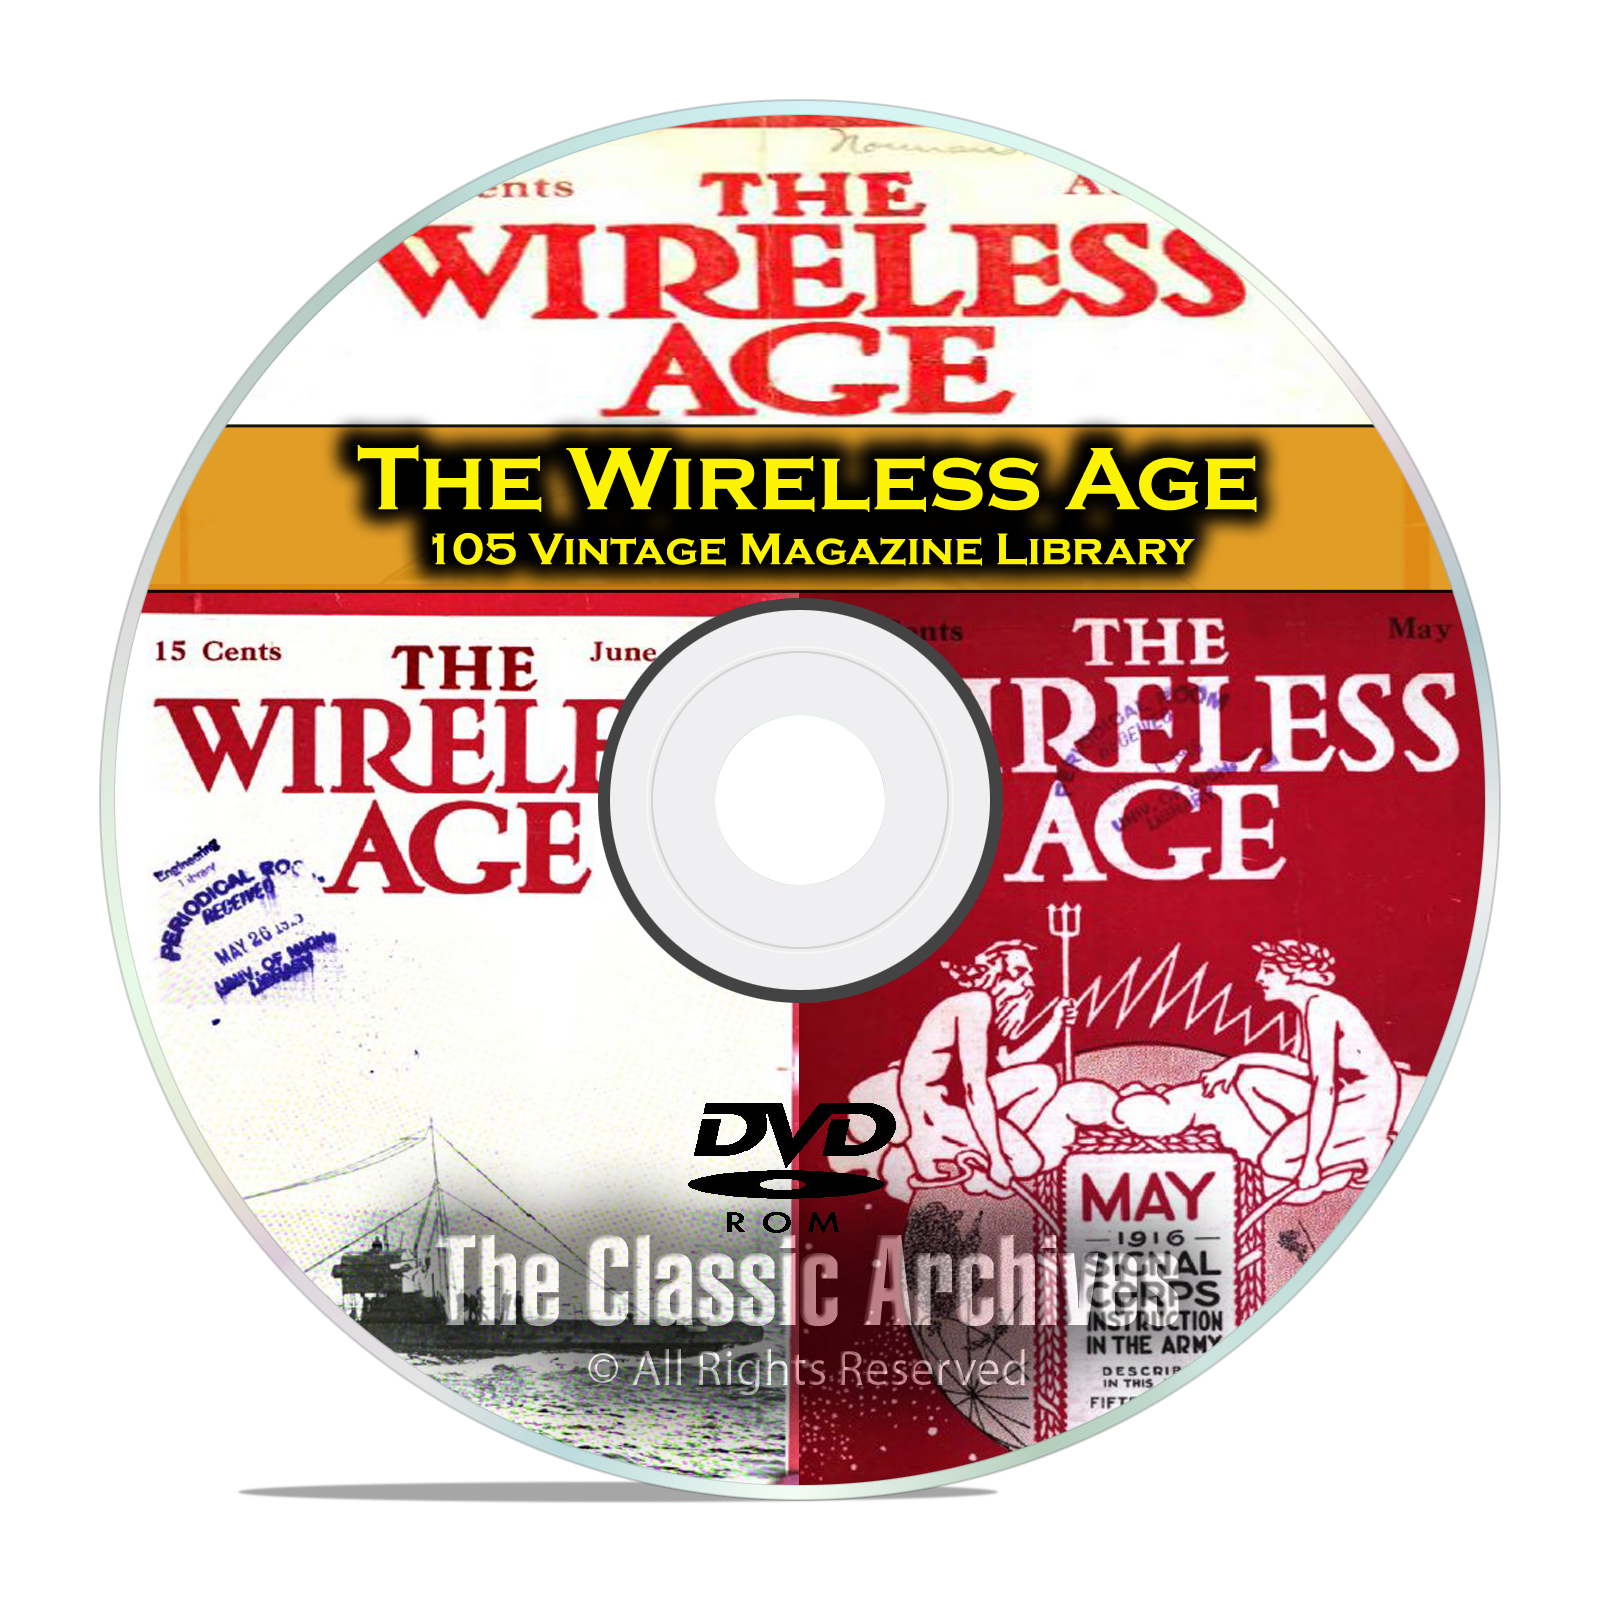 The Wireless Age, 105 Vintage Old Time Radio Magazine Collection PDF DVD